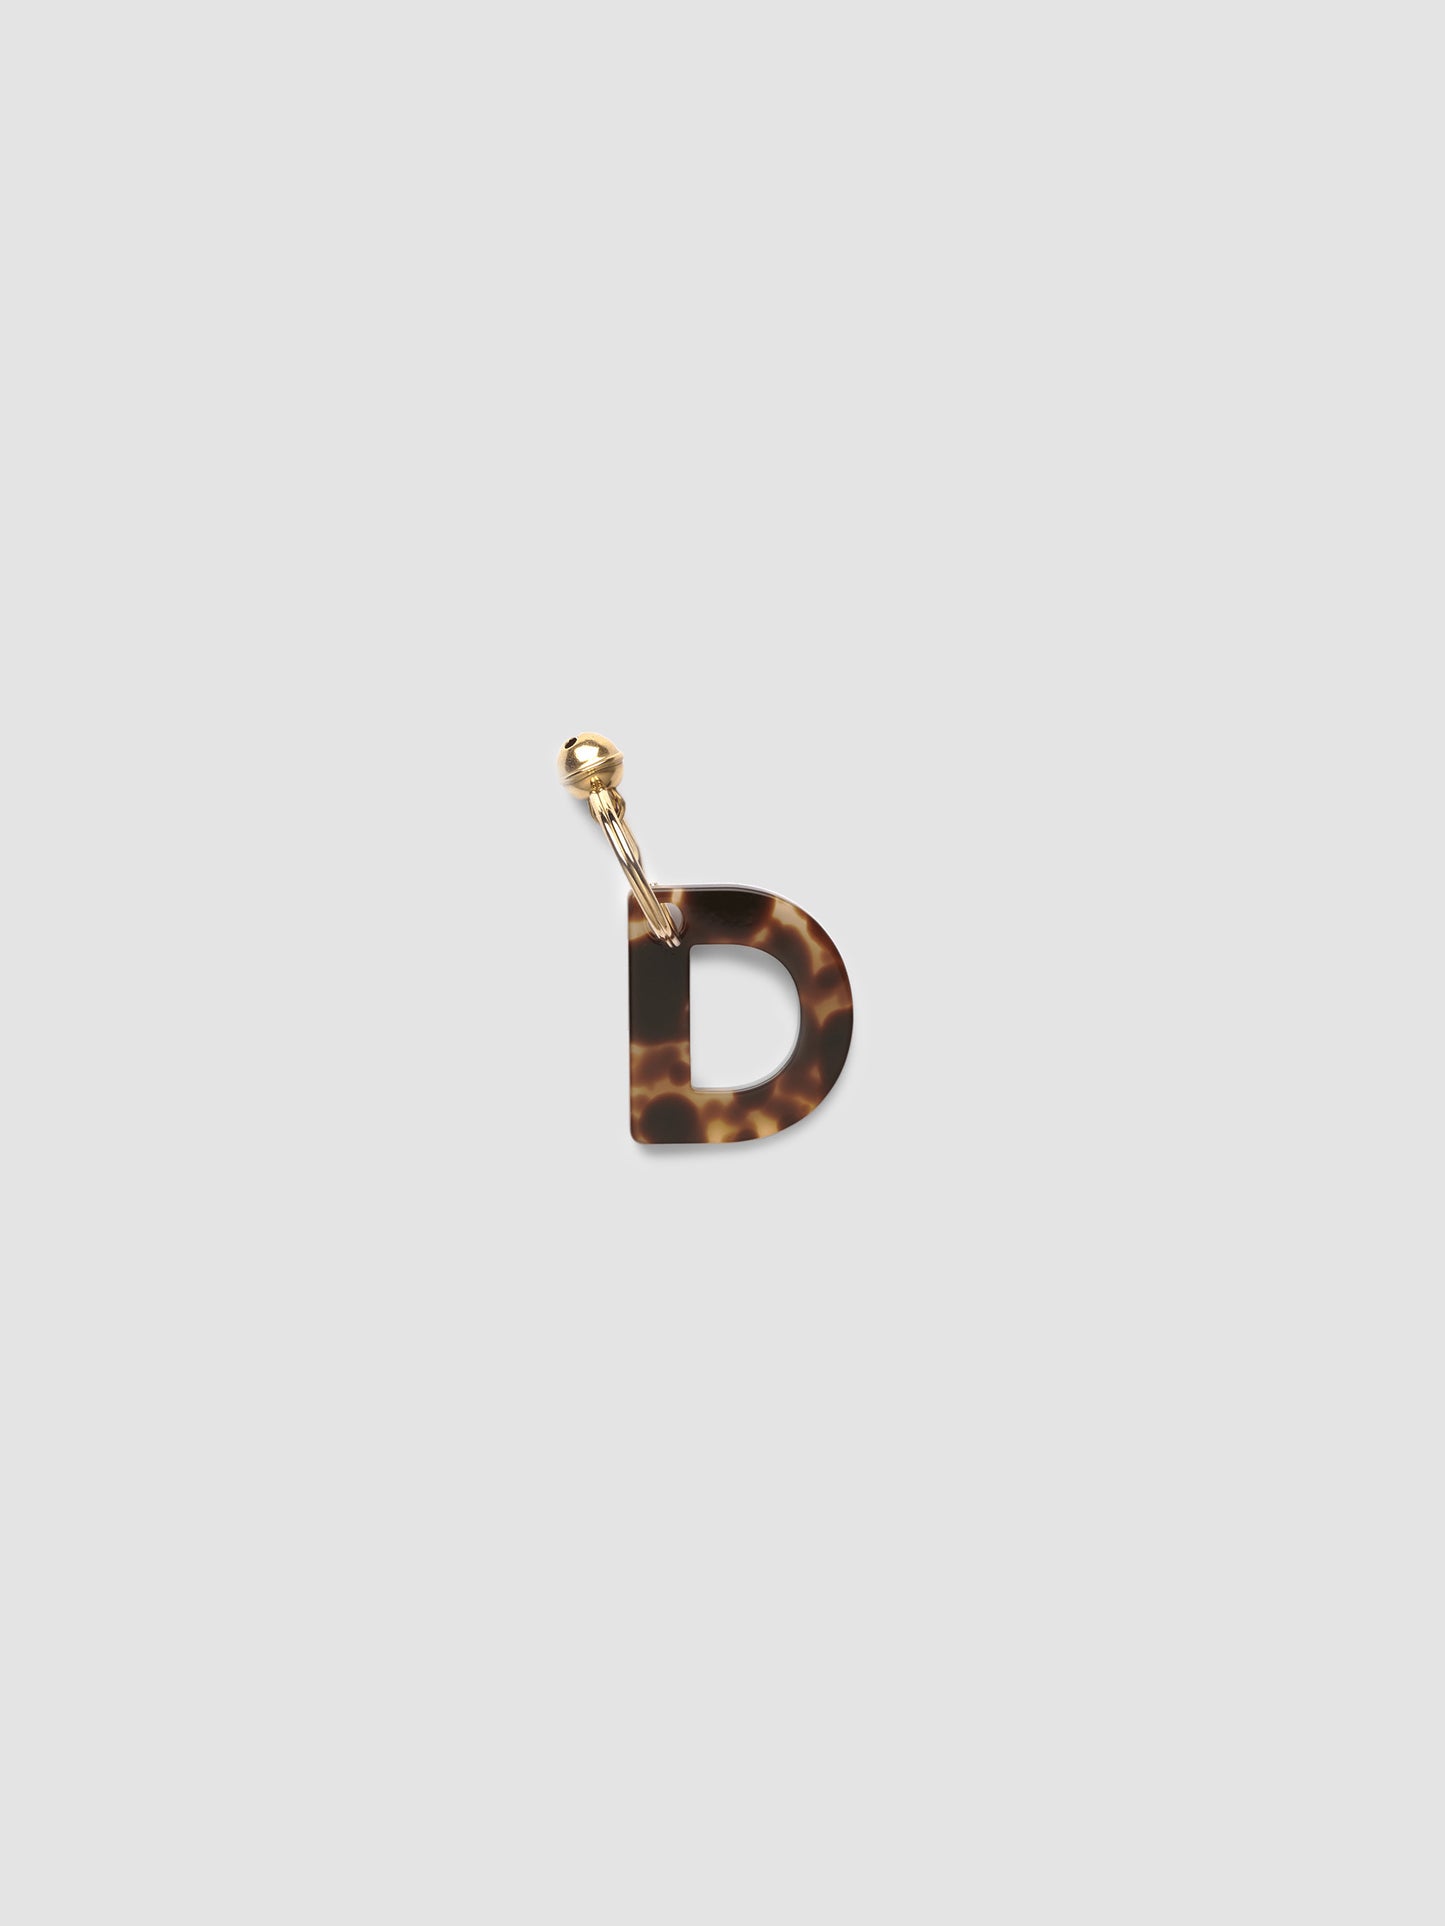 D Letter Keychain